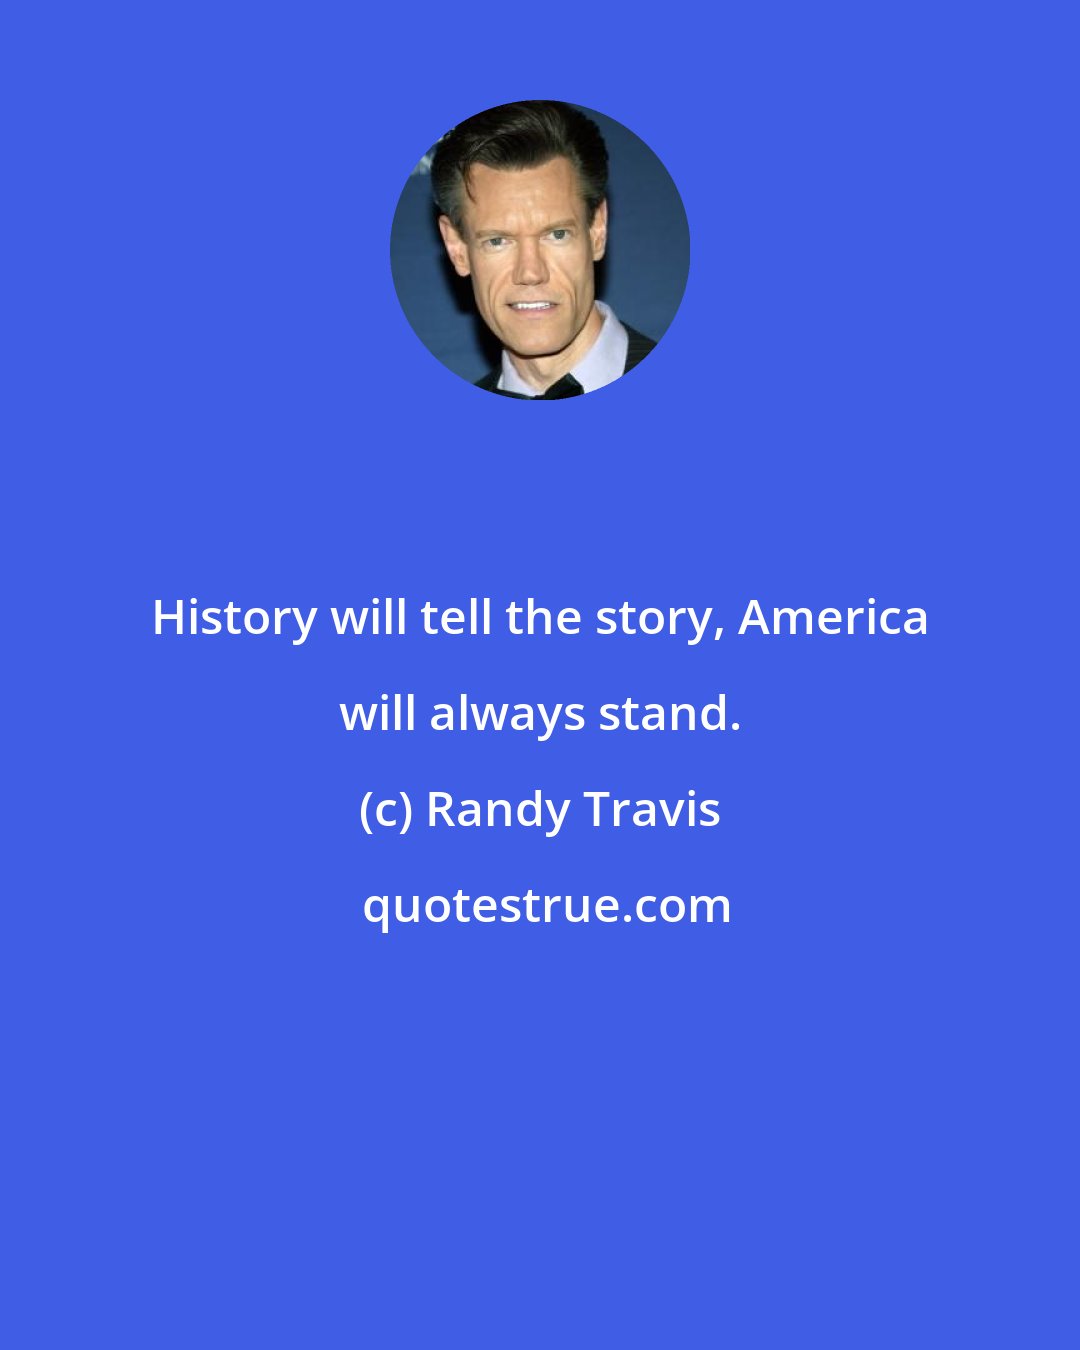 Randy Travis: History will tell the story, America will always stand.